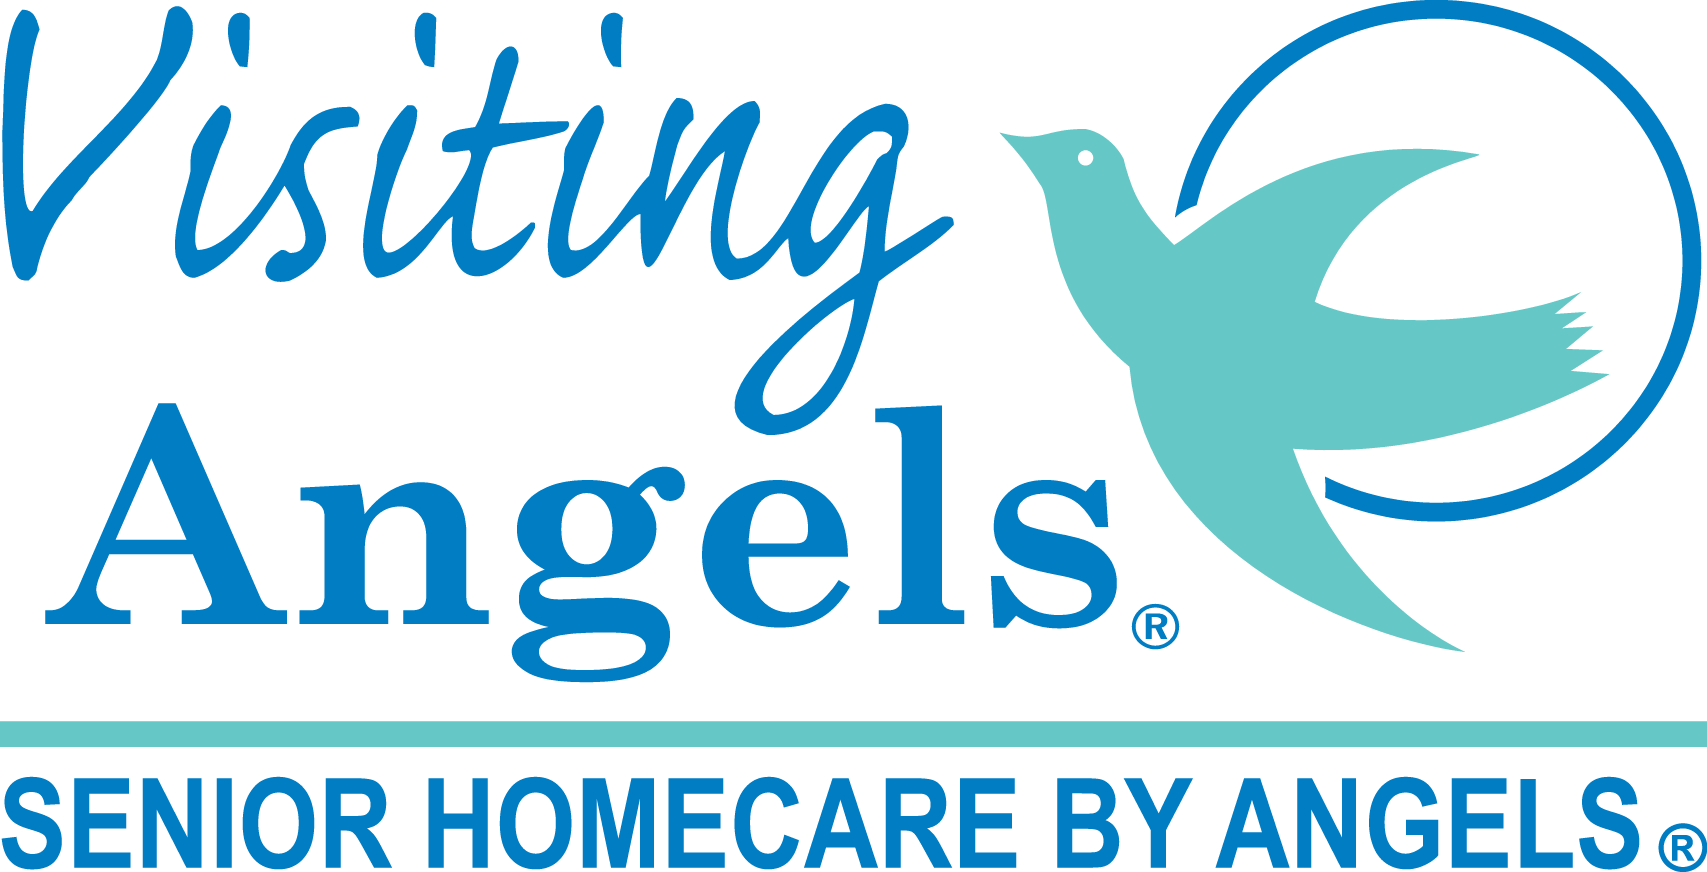 Visiting Angels Senior Home Care And Elder Care Services,home - Visiting Angels (1707x872)